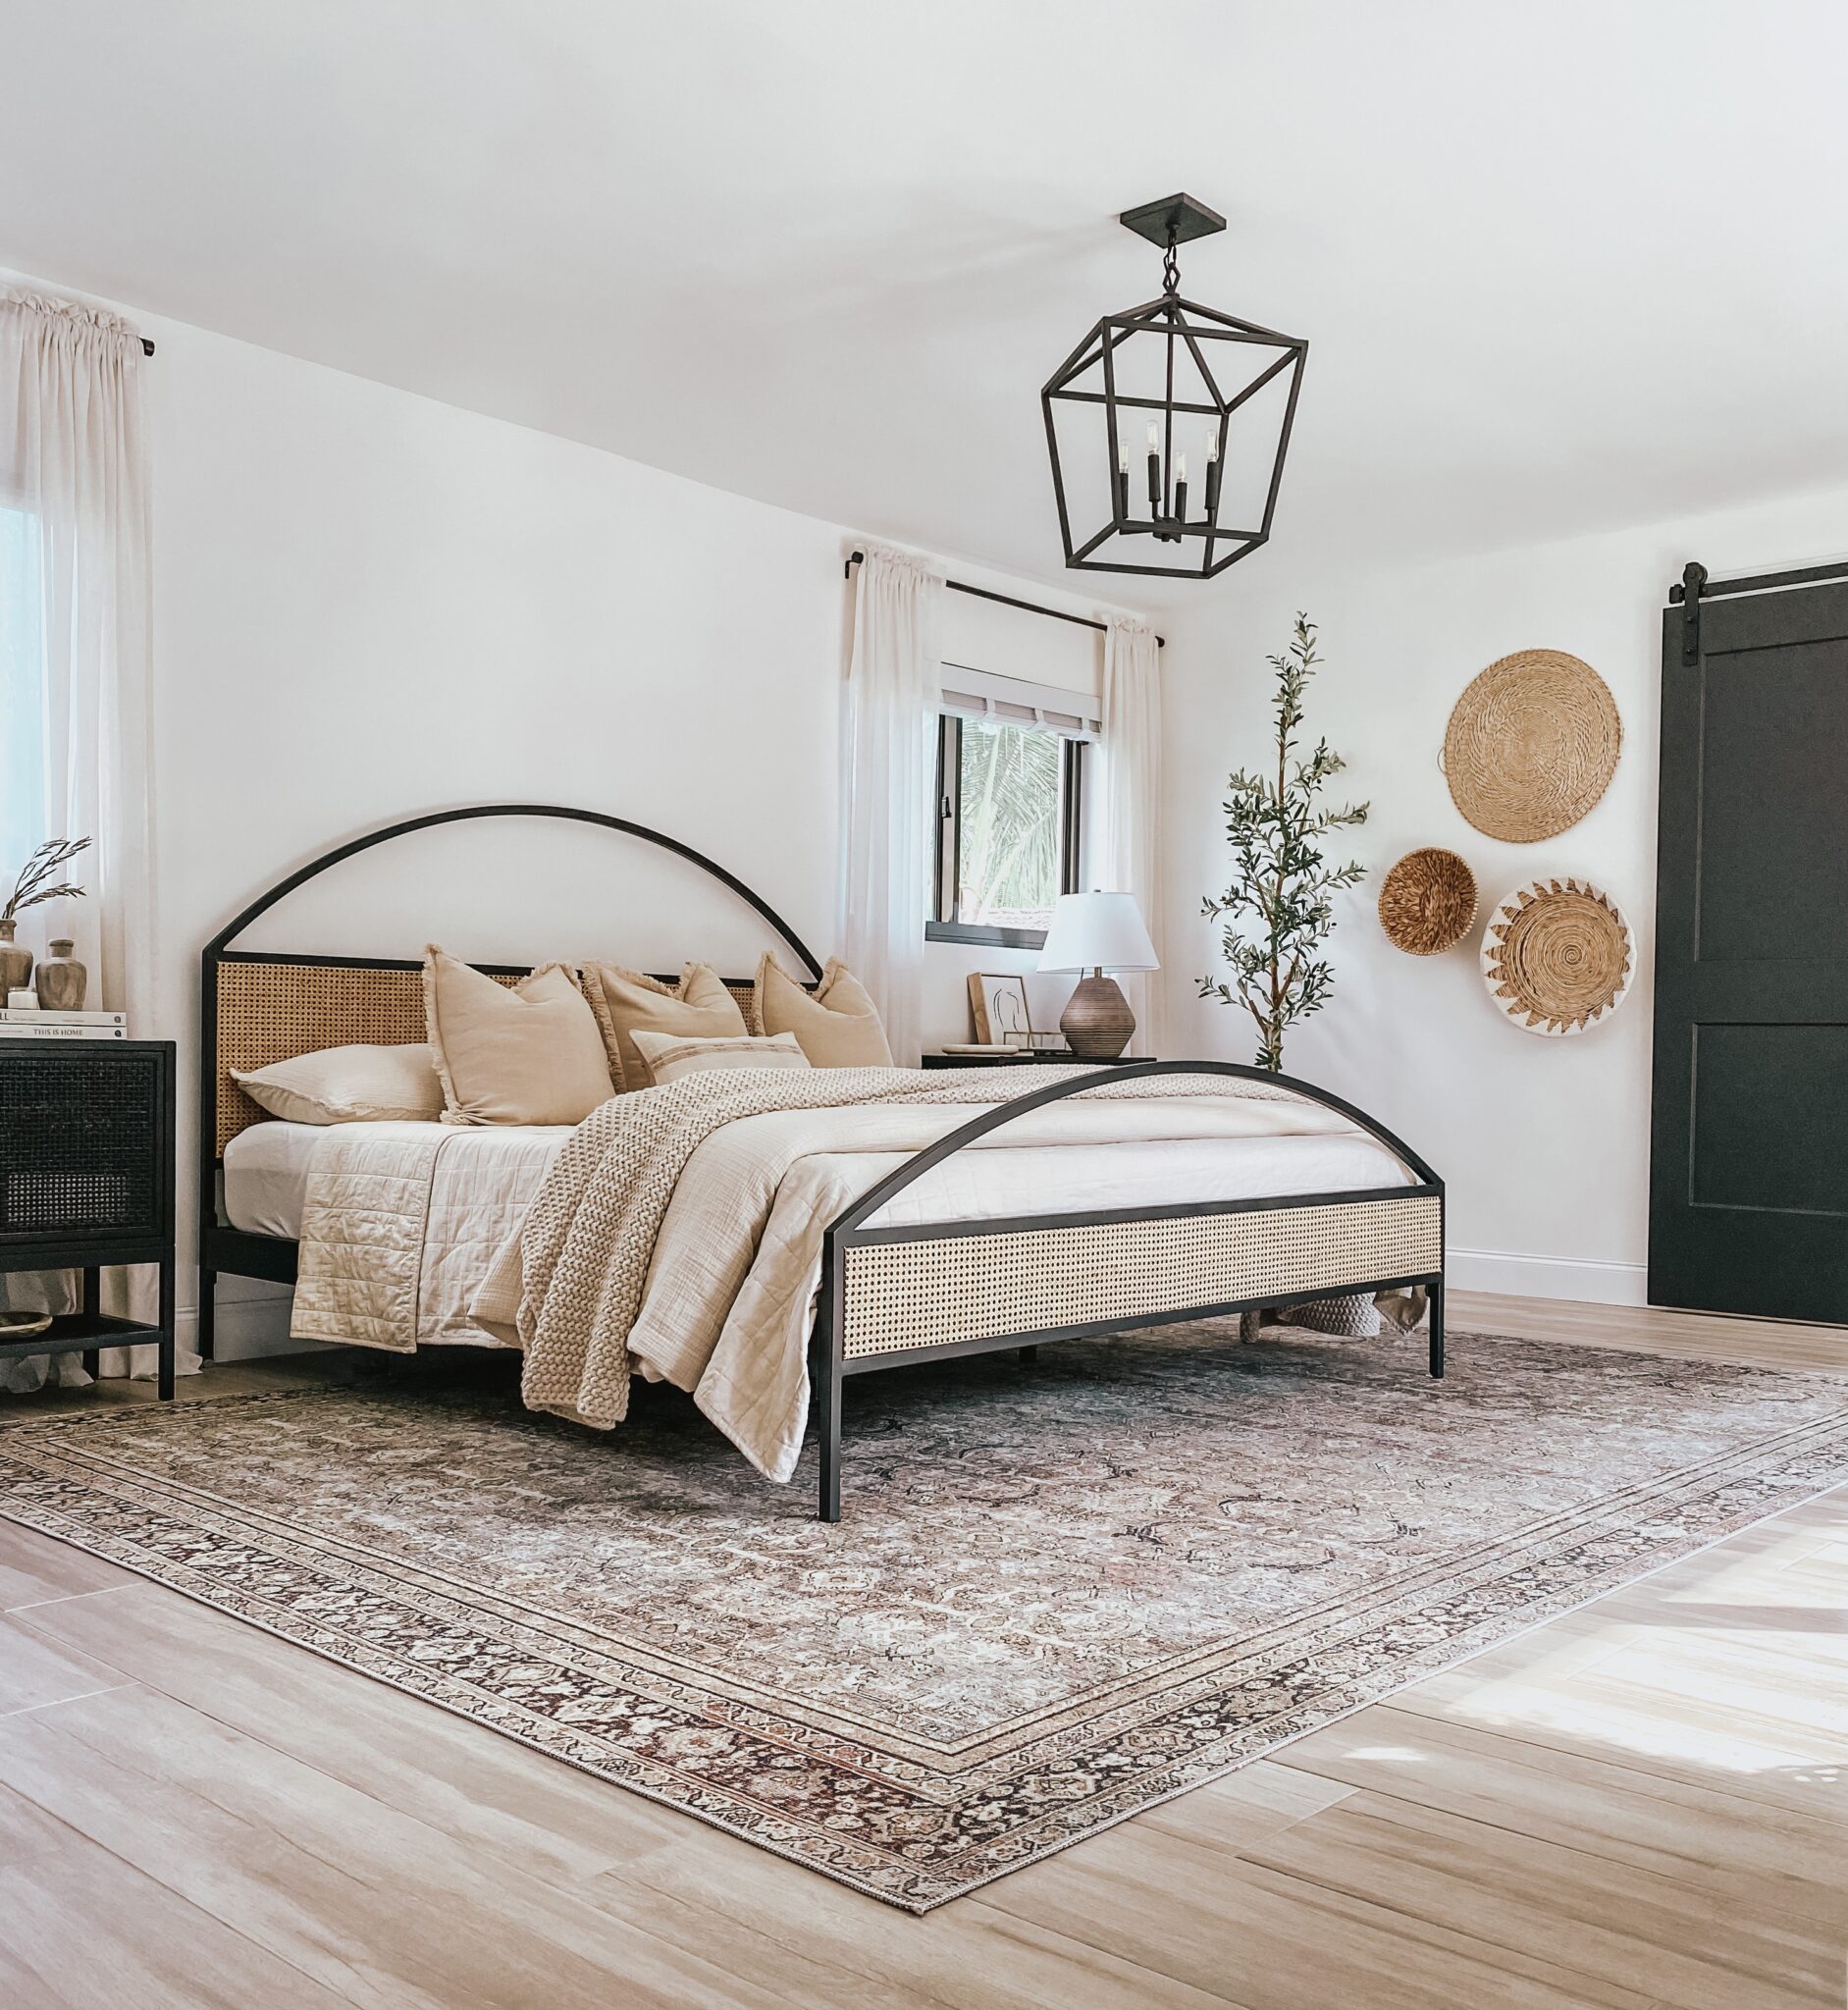 How to Create a Modern Organic Bedroom | Jen's Gathering Nest